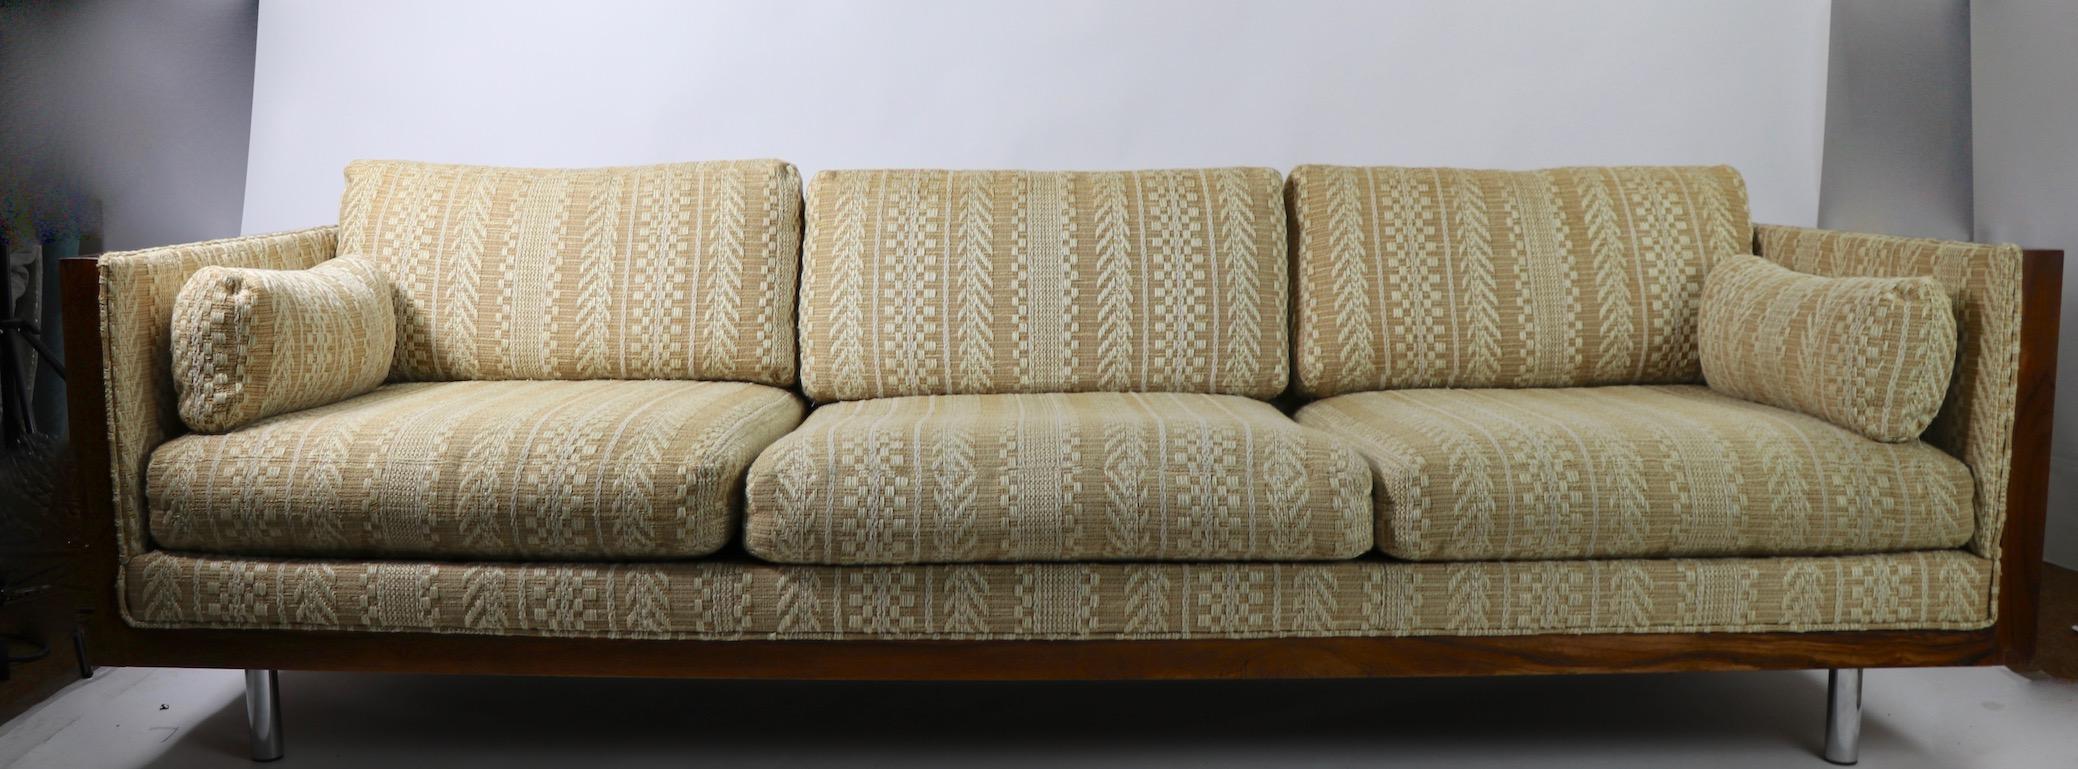 Rosewood Box Sofa by Carlton after Milo Baughman Pair Available 1